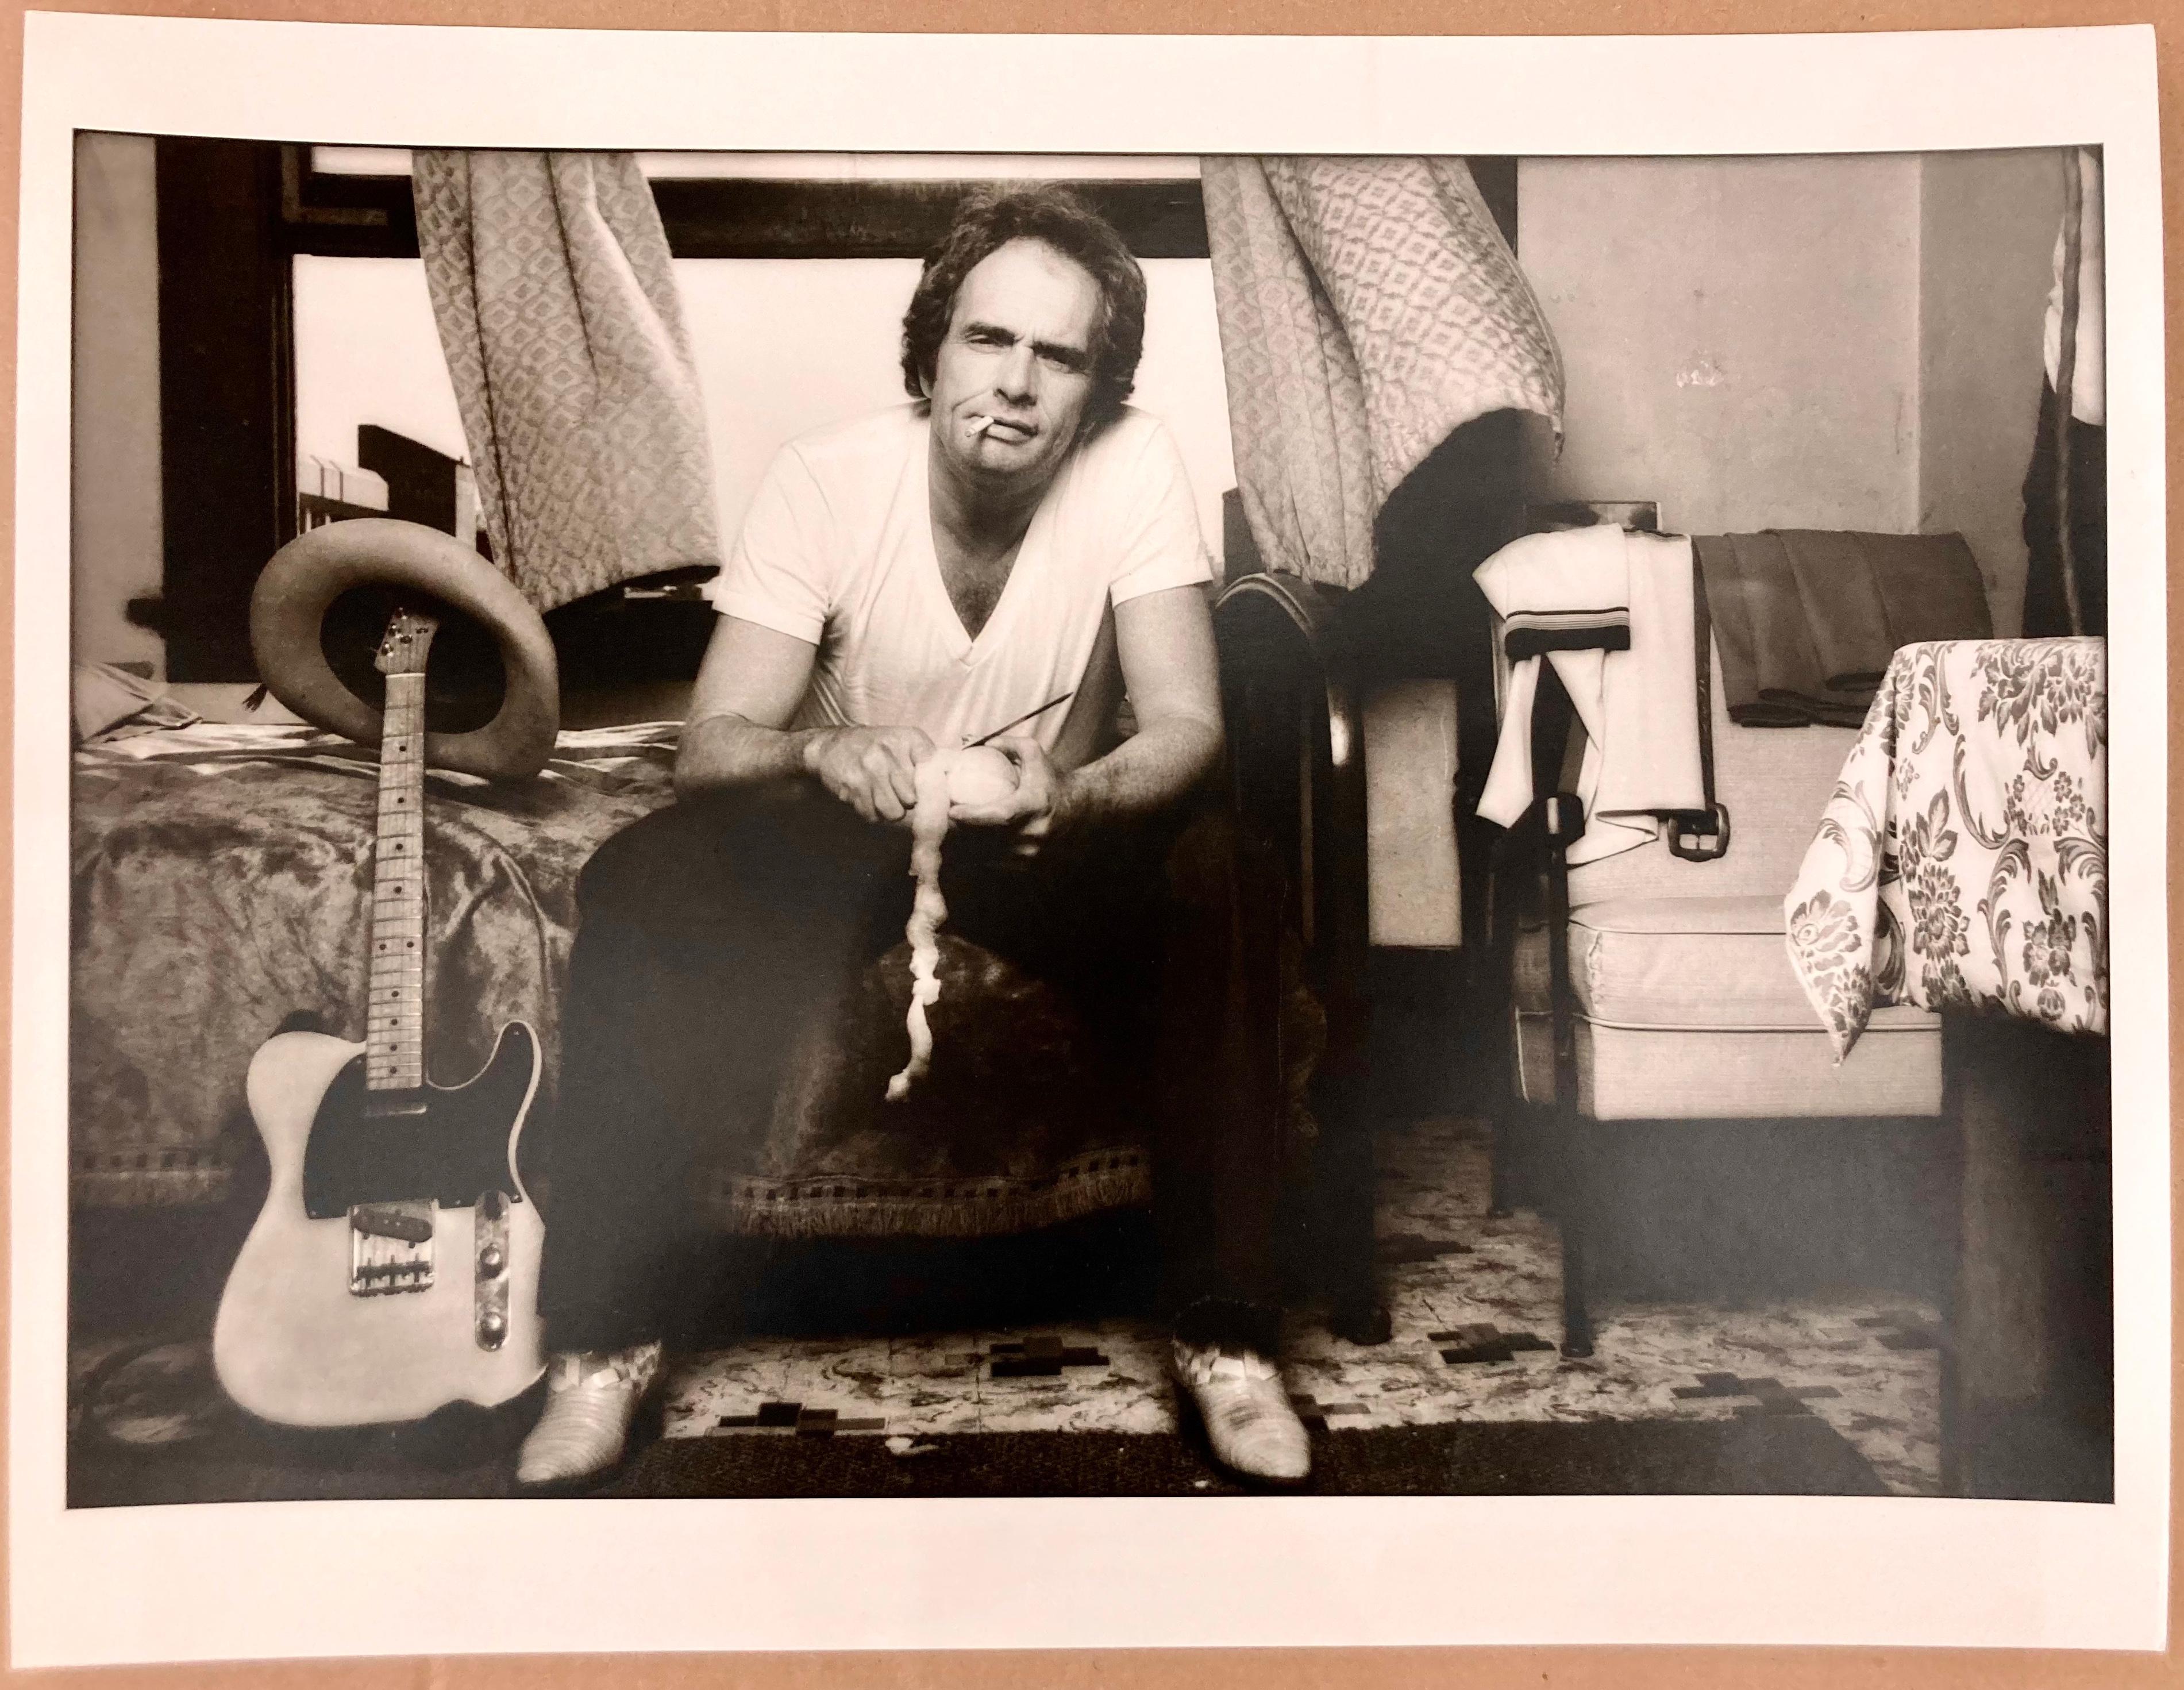 Original vintage 16x20” work print from Norman Seeff of Merle Haggard. Hand printed in 1981 at the time of the photoshoot, signed on the back by Norman Seeff and stamped with Norman’s studio stamp

In excellent condition having been stored flat in a